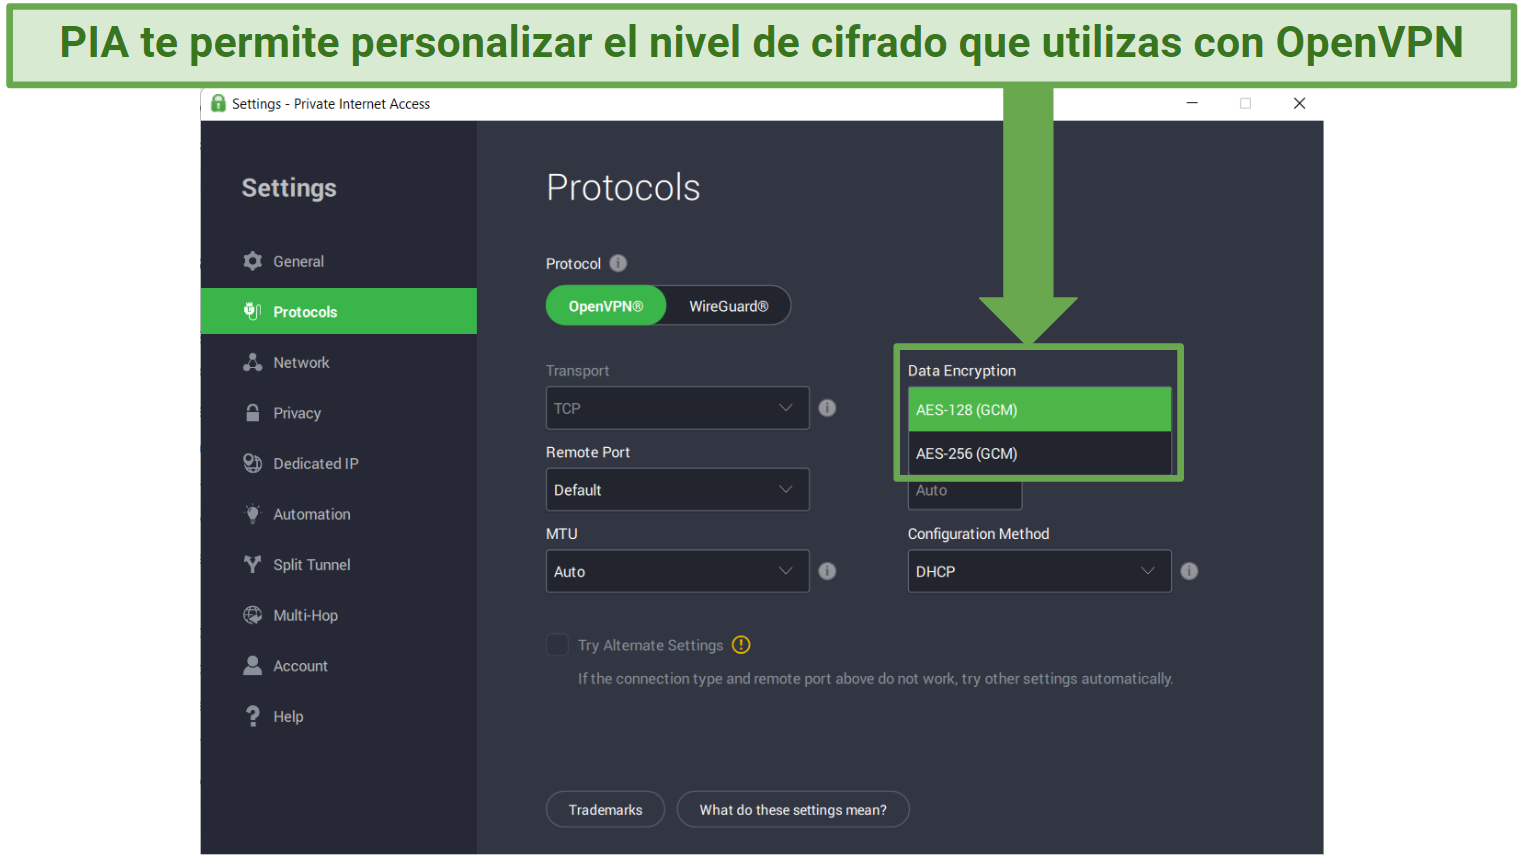 Screenshot showing how to optimize your connection for Steam with PIA